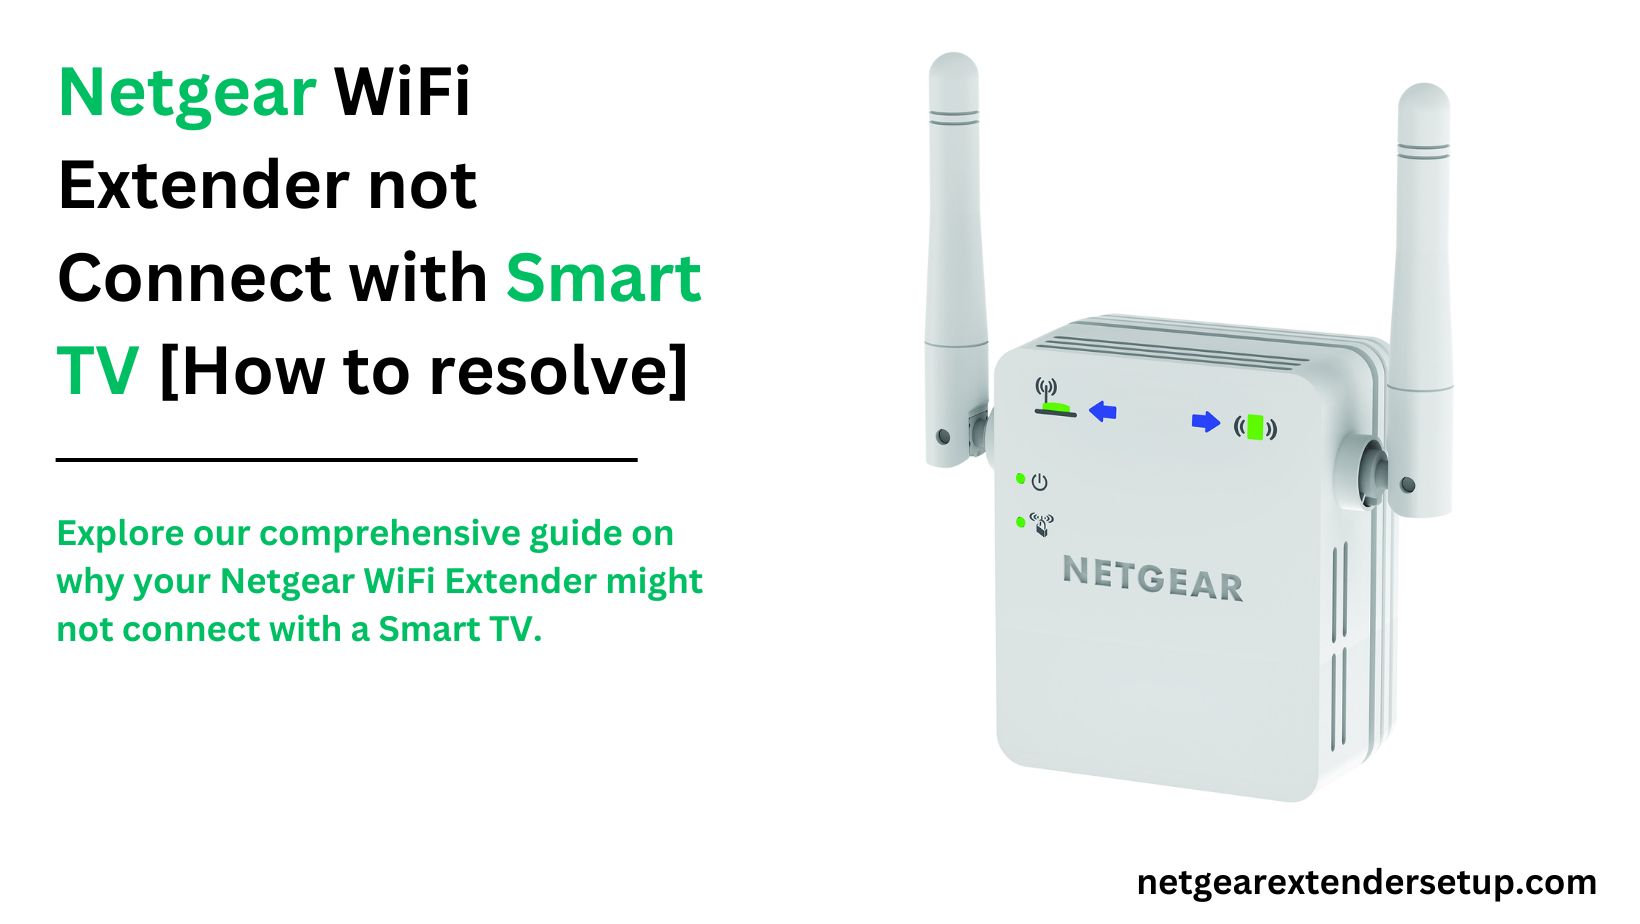 You are currently viewing Netgear WiFi Extender not Connect with Smart TV [How to resolve]